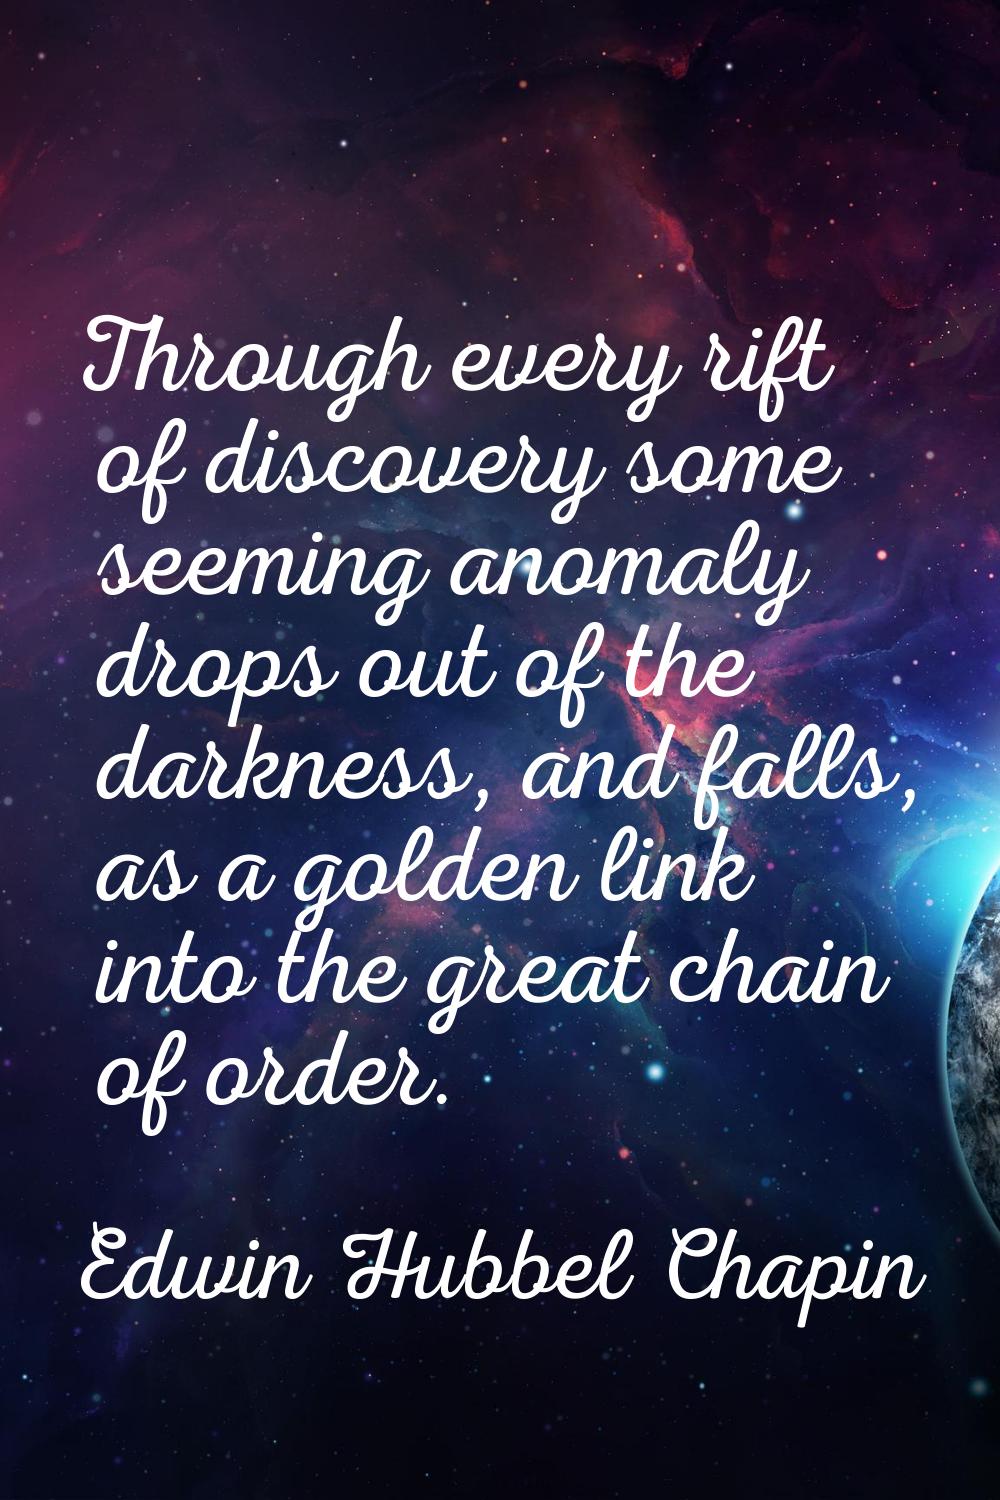 Through every rift of discovery some seeming anomaly drops out of the darkness, and falls, as a gol